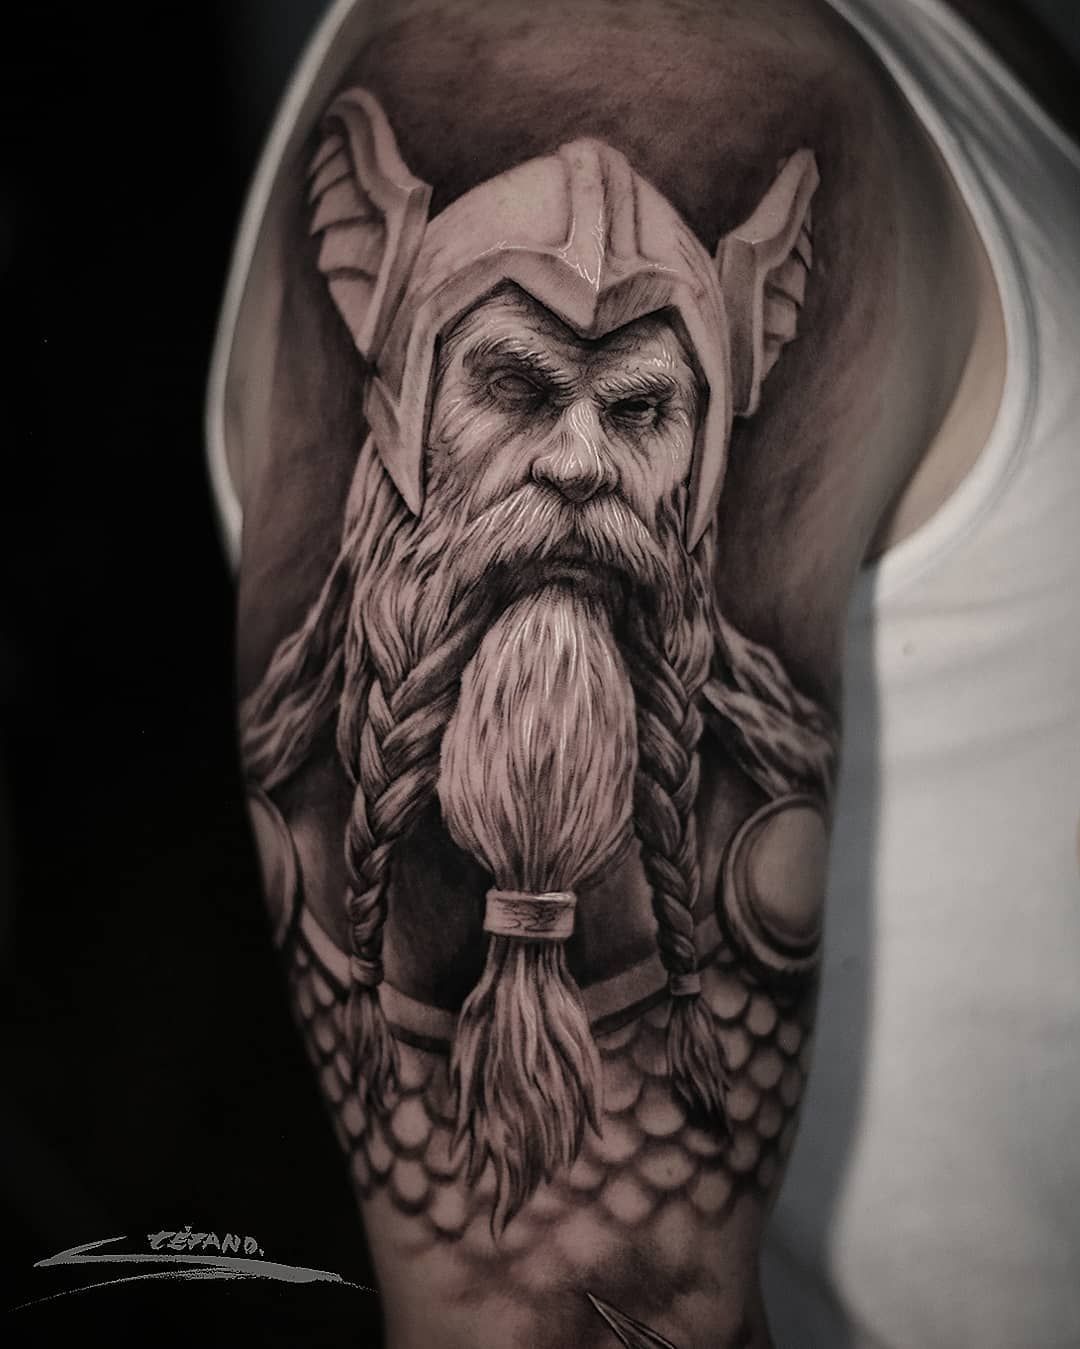 My Odin inspired hand tattoo done by artist Tiago Siez at Alto Astral  Tattoo Studio in Quinta do Conde Portugal Let me know what you guys think   rtattoos